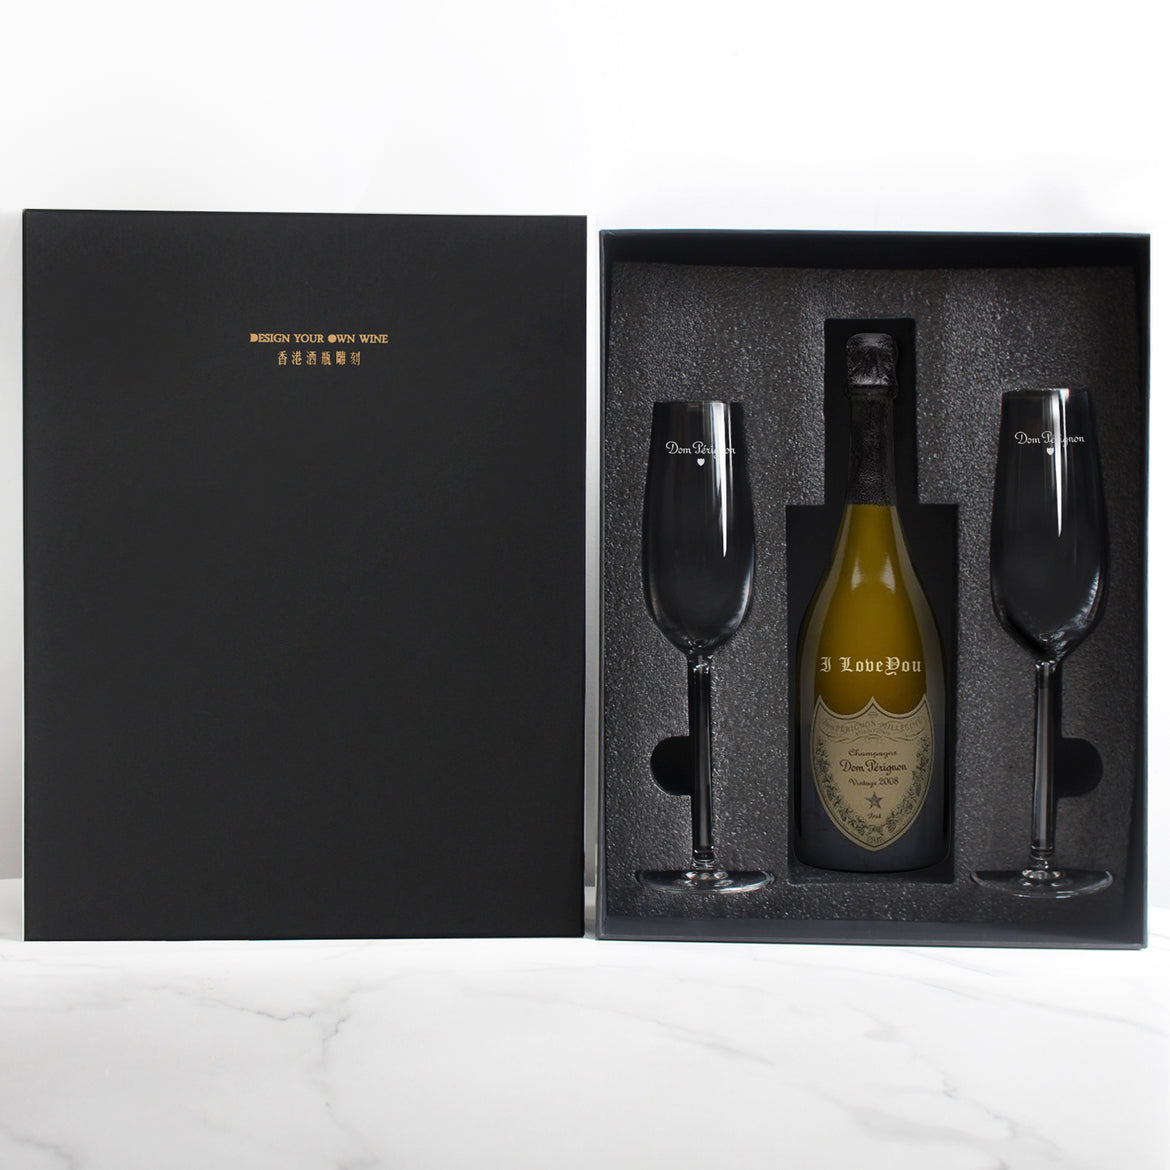 Dom Perignon Vintage Champagne with Engraved Gift Box